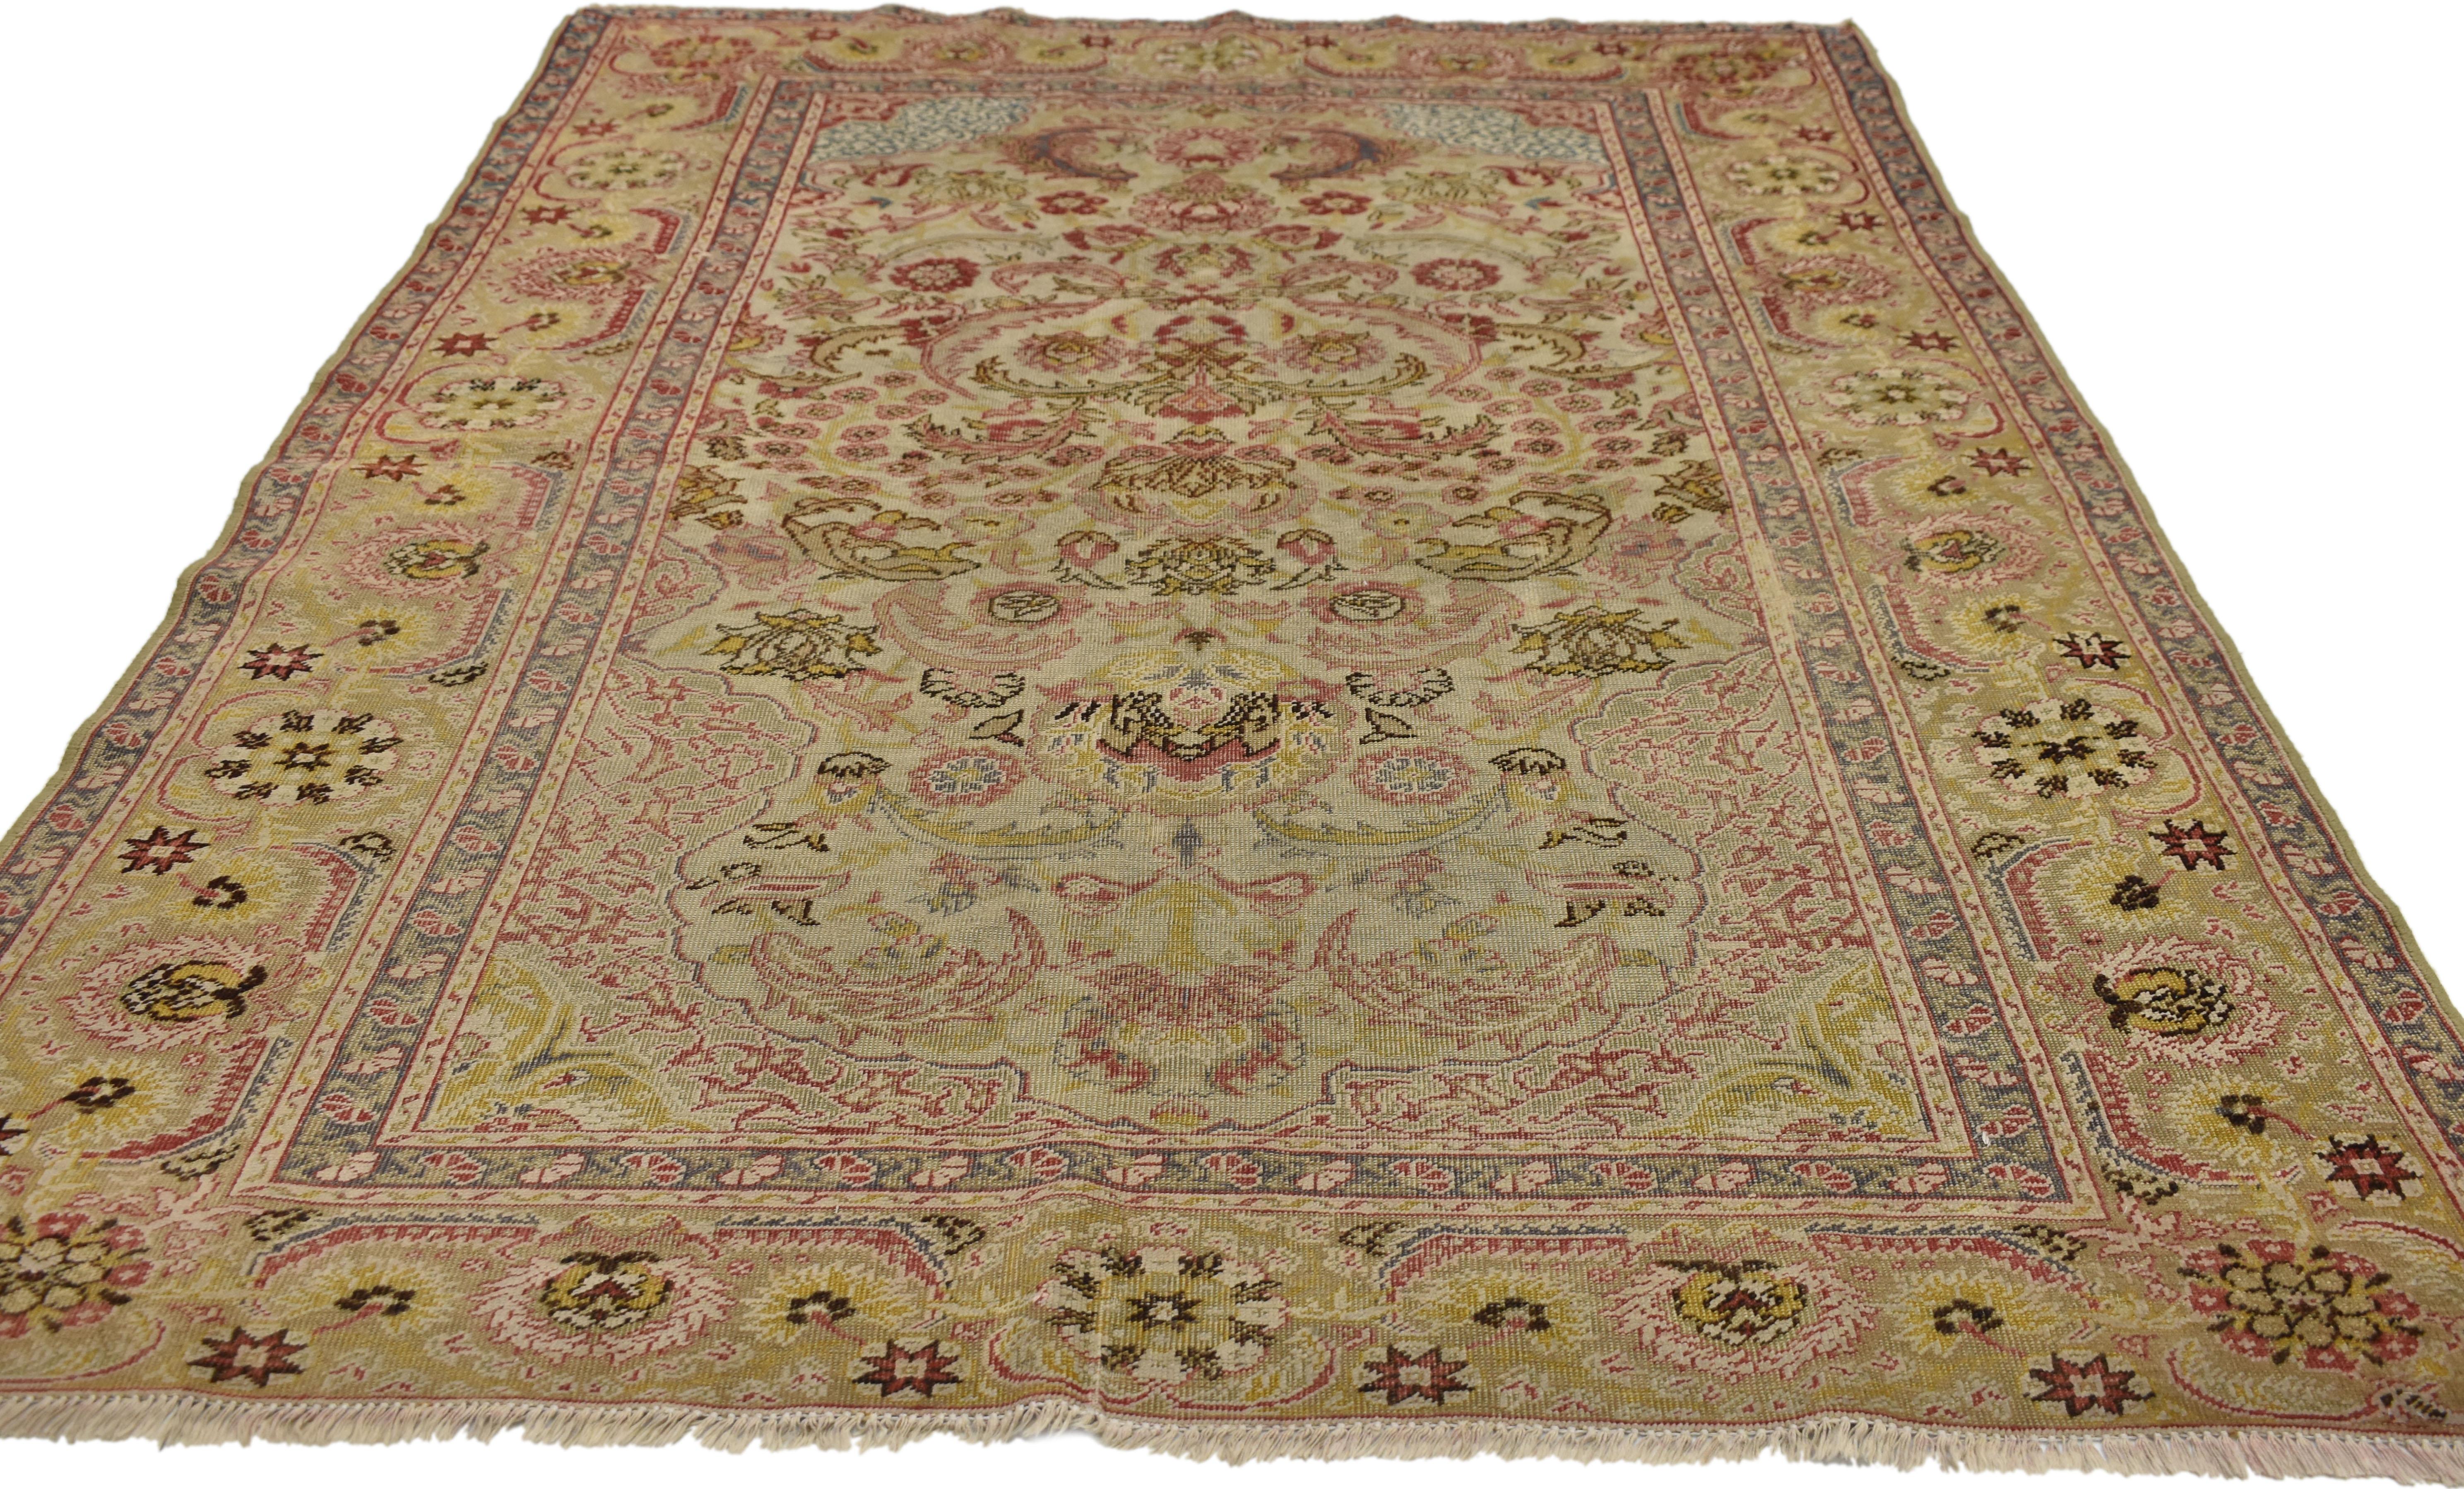 Arts and Crafts Distressed Antique Turkish Hereke Rug with Rustic English Country Cottage Style